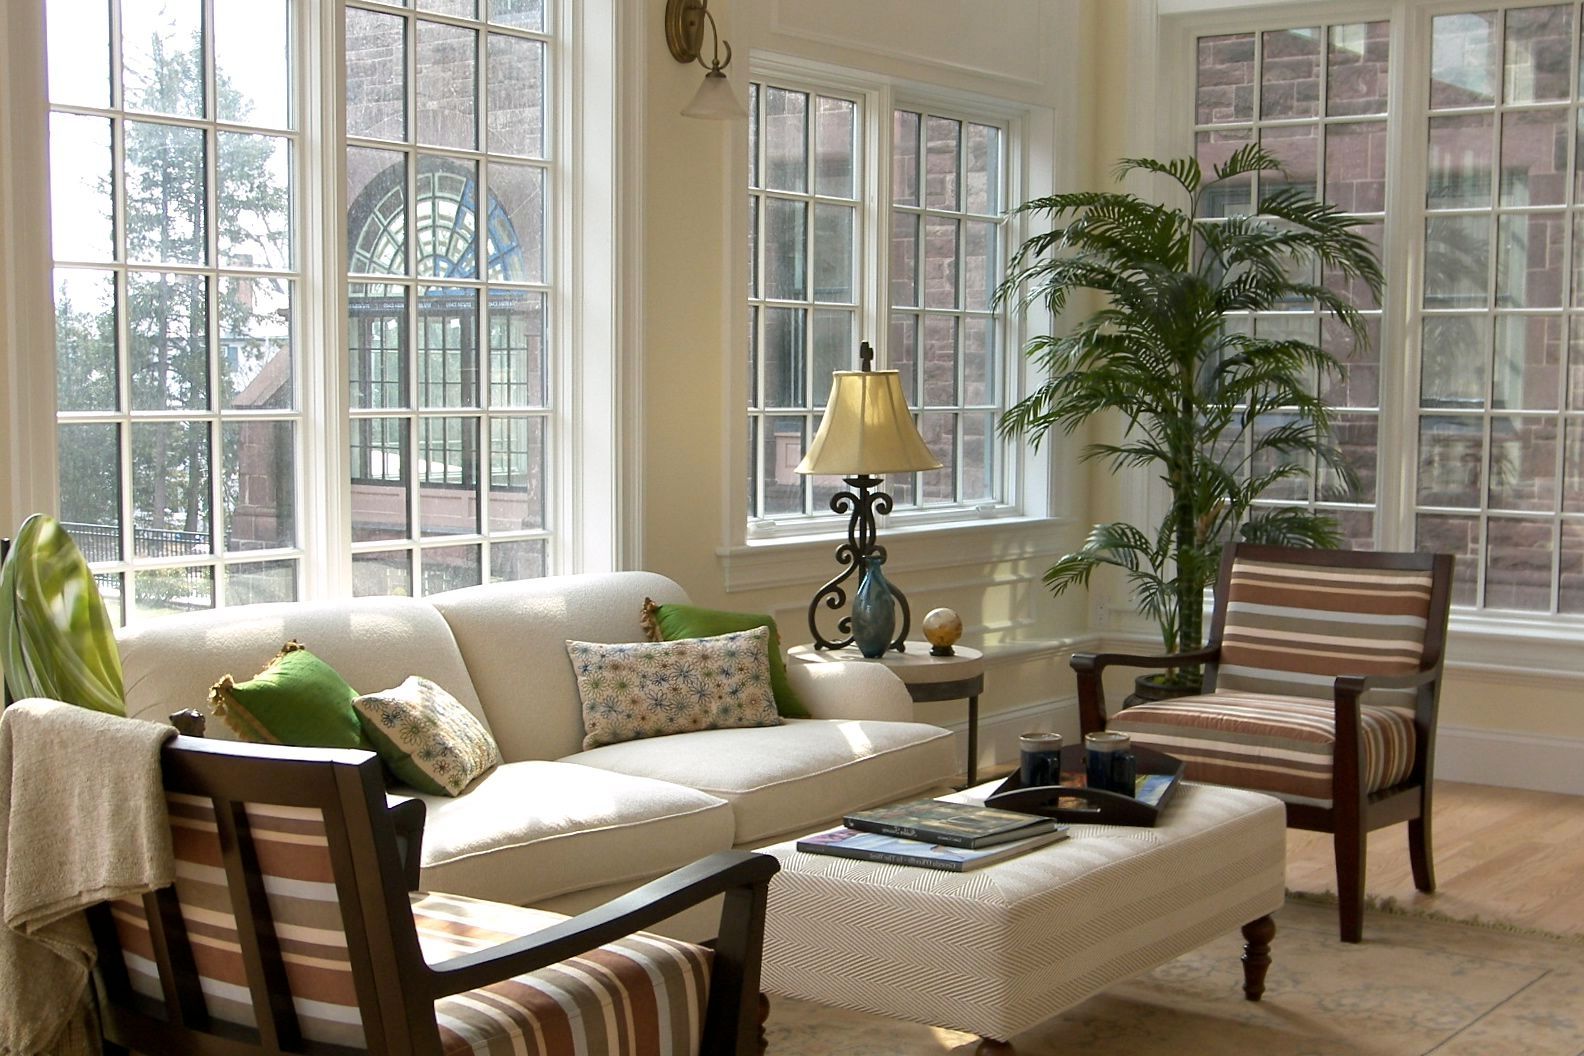 Nice White And Brown Striped Sunroom Furniture Layout Idea With Decorative Table Lamp Also French Windows Design (Photo 2472 of 7825)